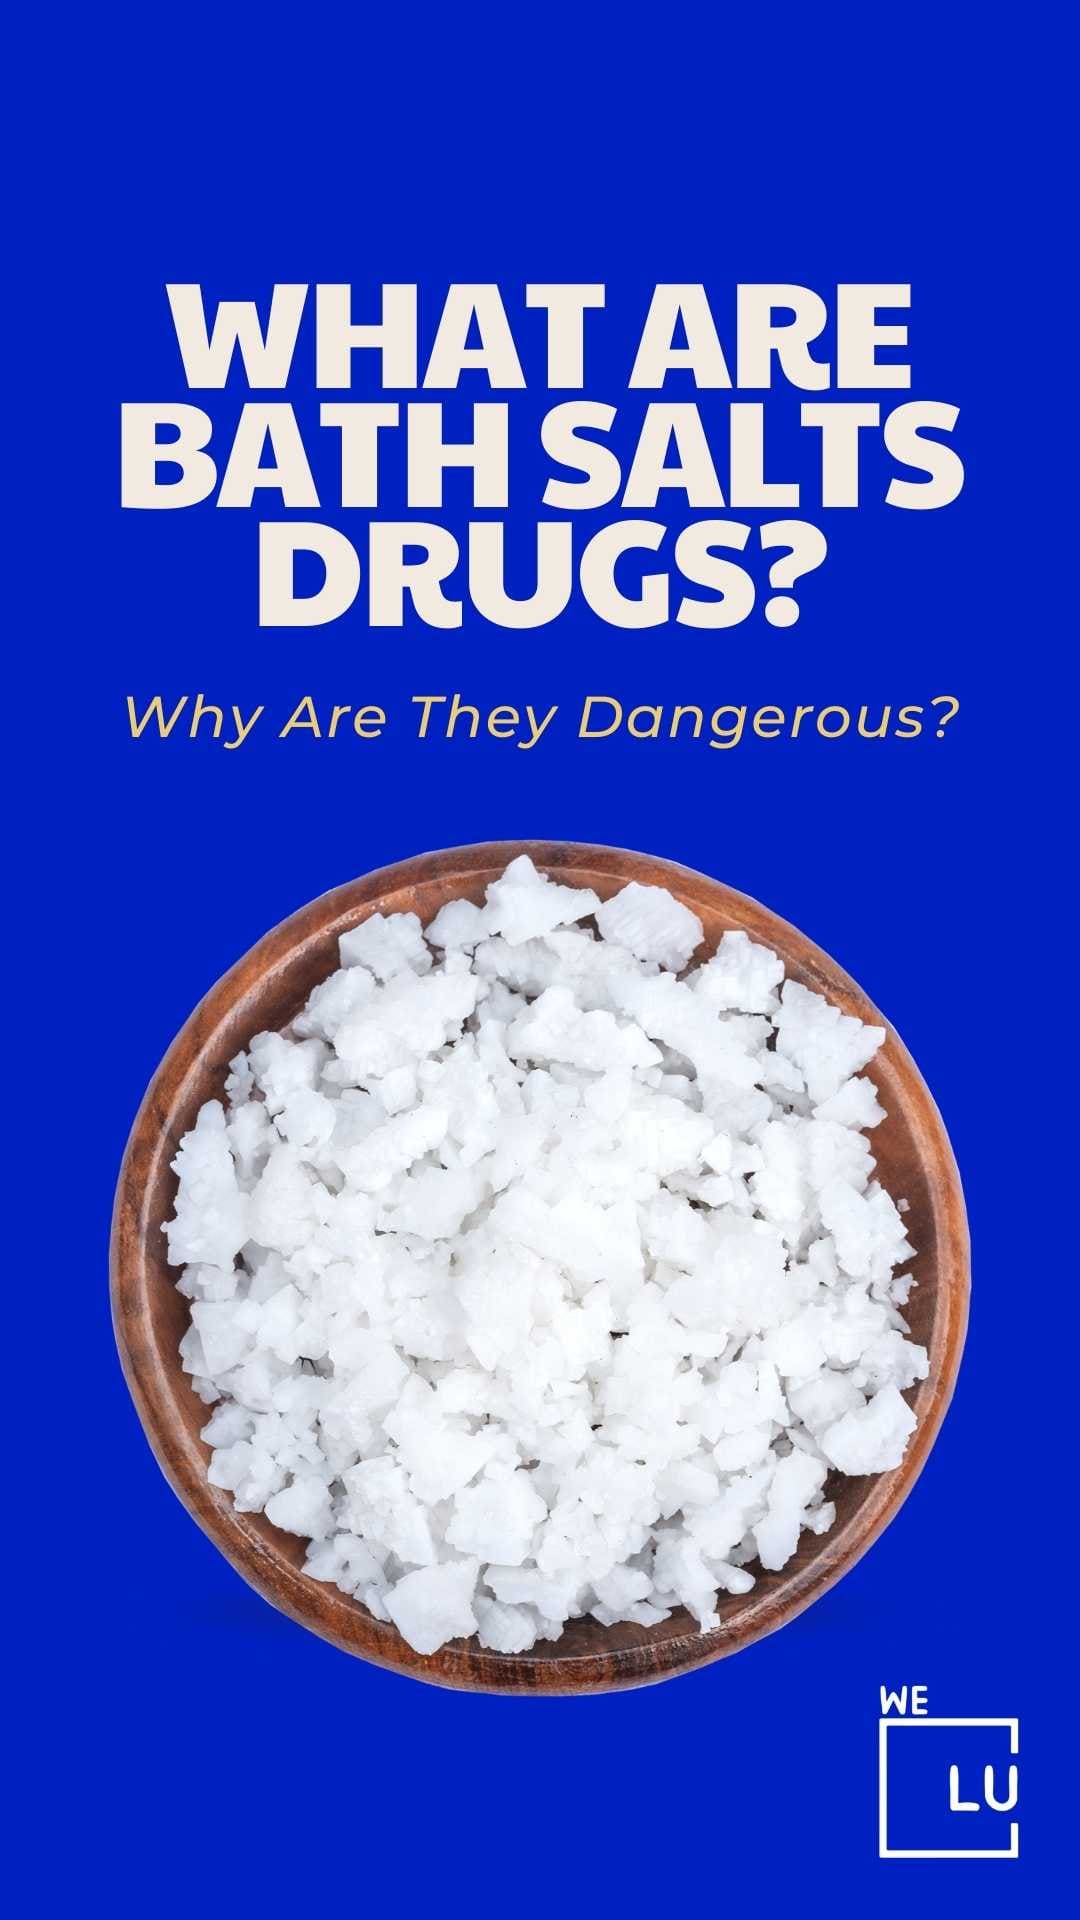 Bath Salts Drug, Why Are They Dangerous? What Are Bath Salts Drugs?